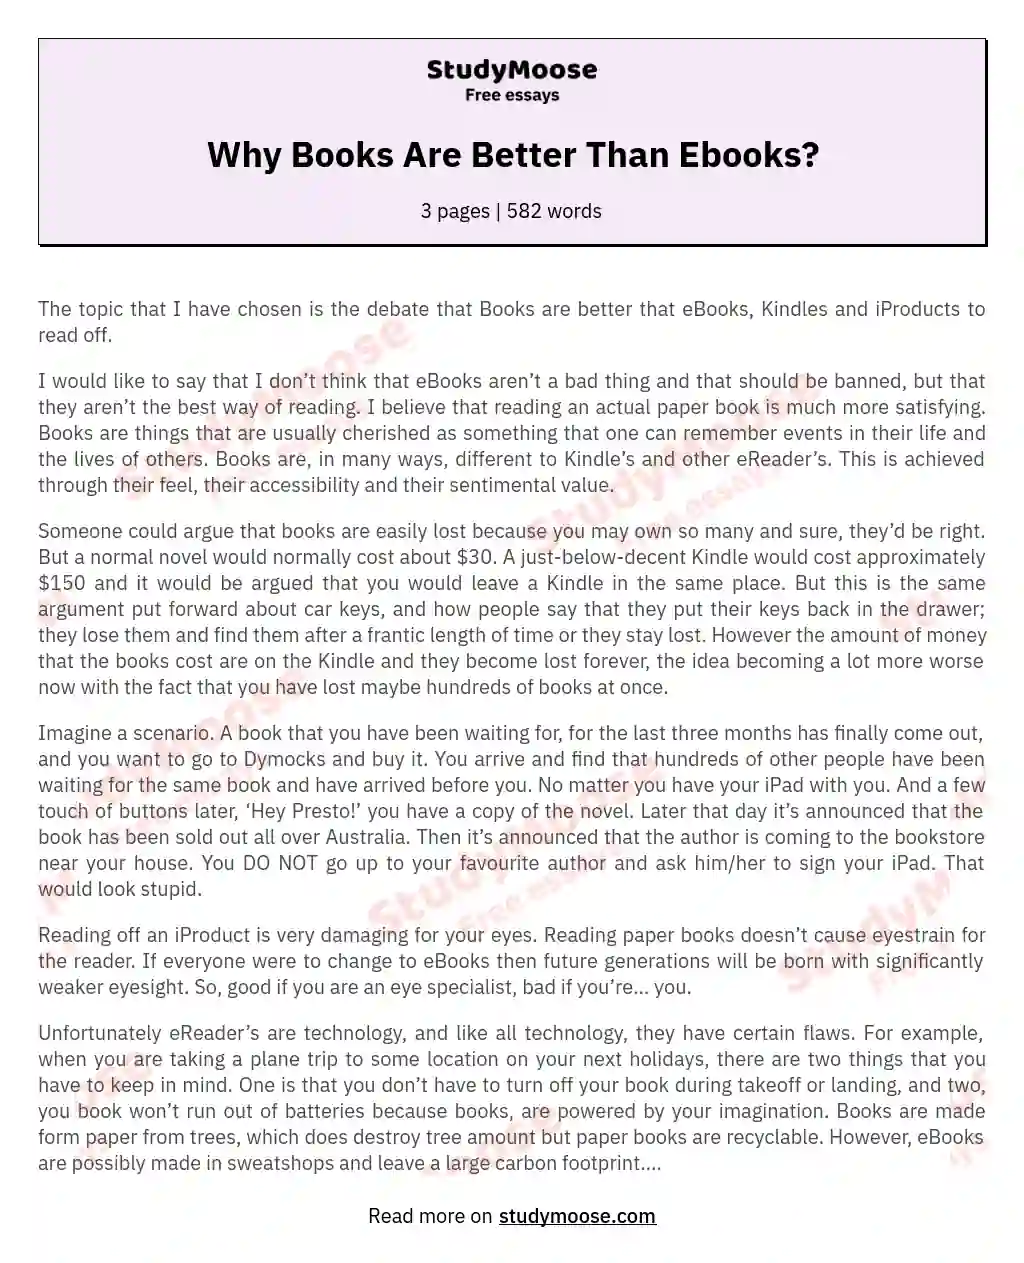 essay on are paper books better than ebooks